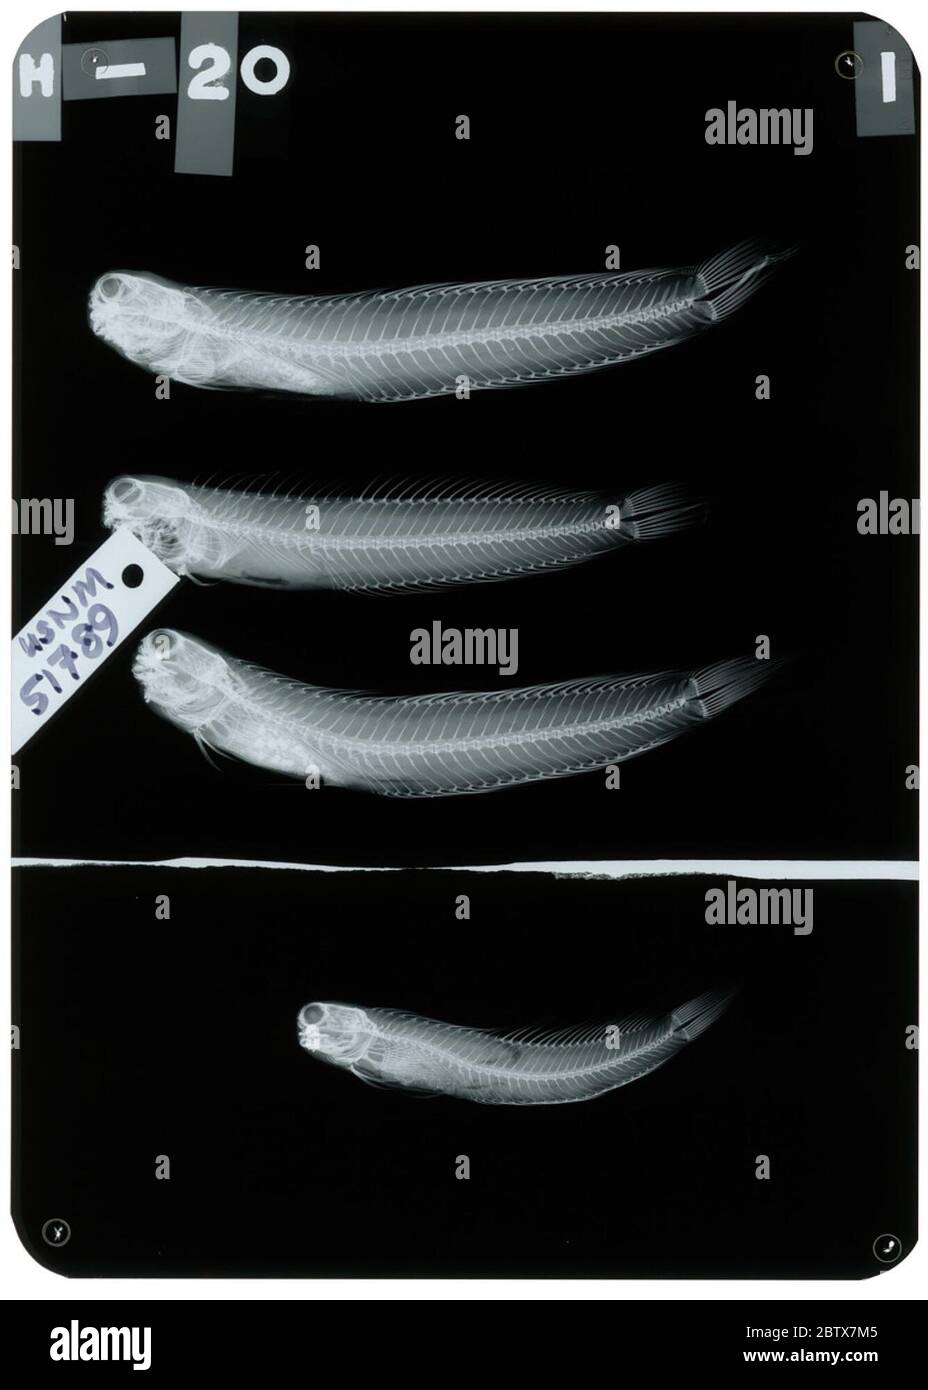 Alticus evermanni Jordan Seale. Radiograph is of a holotype; The Smithsonian NMNH Division of Fishes uses the convention of maintaining the original species name for type specimens designated at the time of description. The currently accepted name for this species is Blenniella chrysospilos.24 Oct 20181 Stock Photo